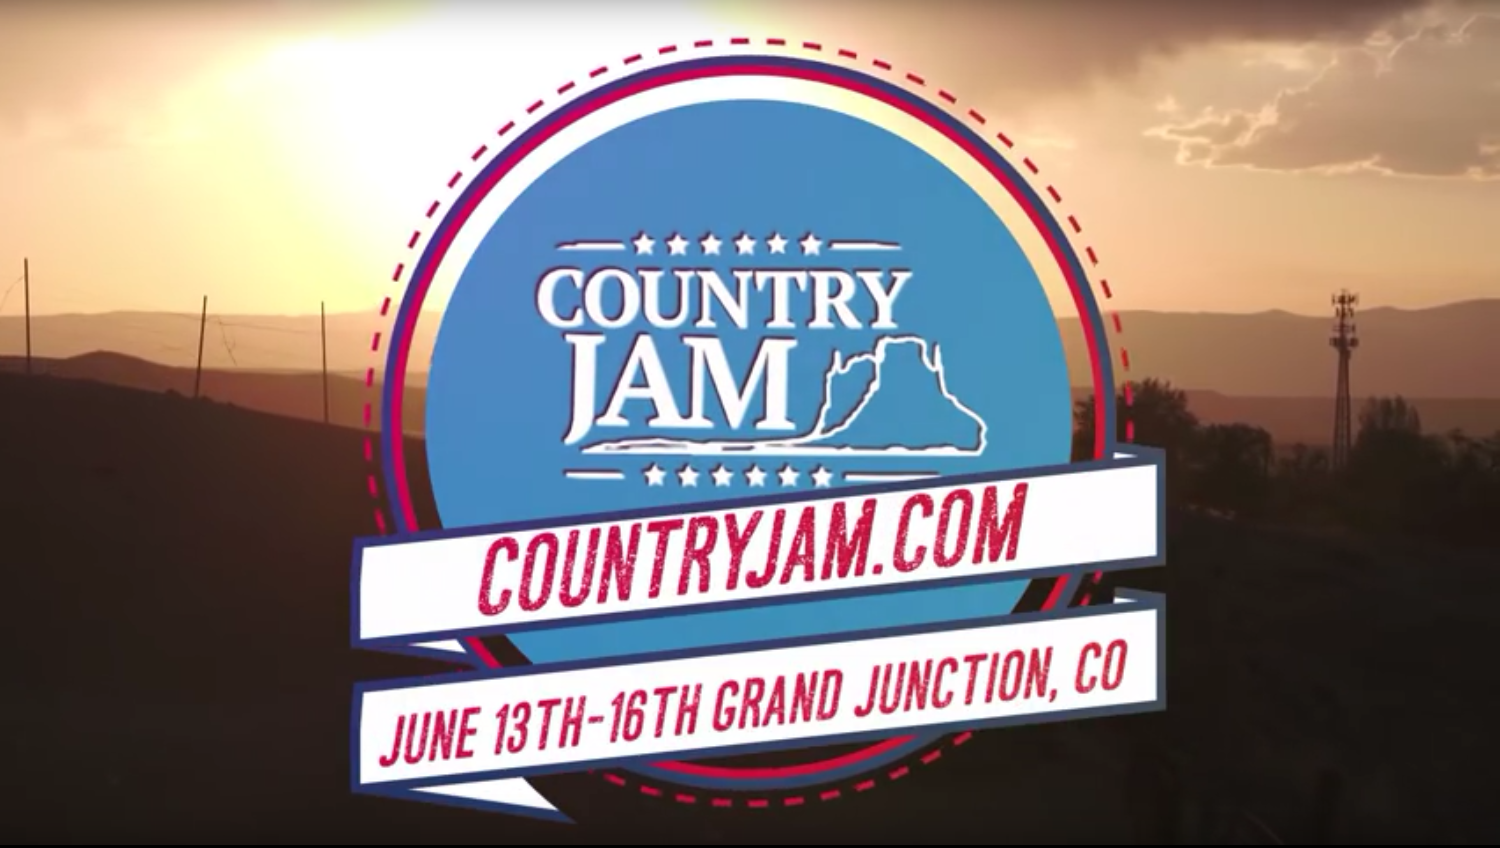 Country Jam 2019 Tickets and Details